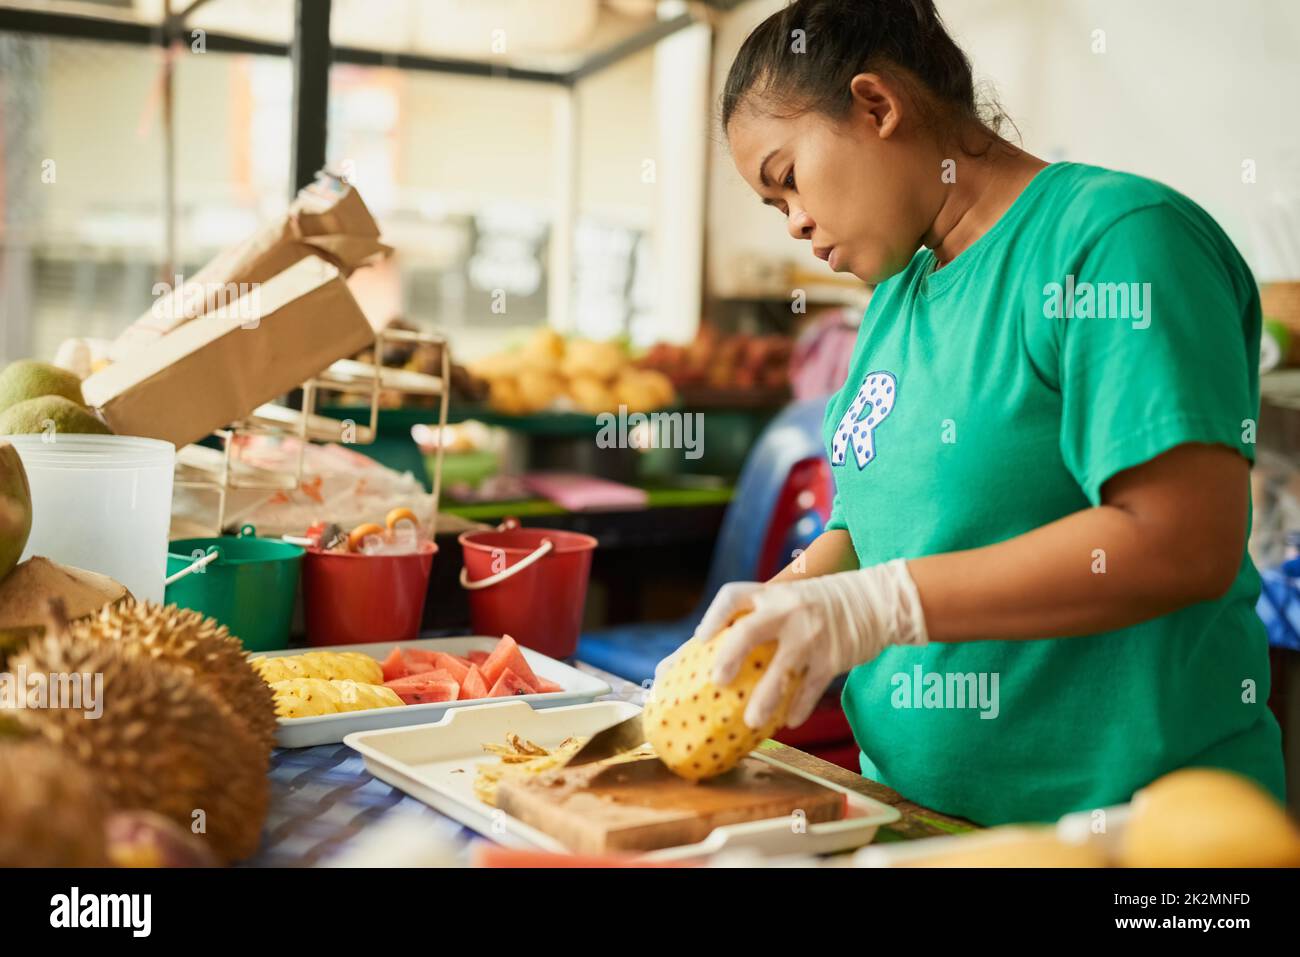 Only the best produce makes the cut. Shot of a woman slicing fruit in a Thai food market. Stock Photo